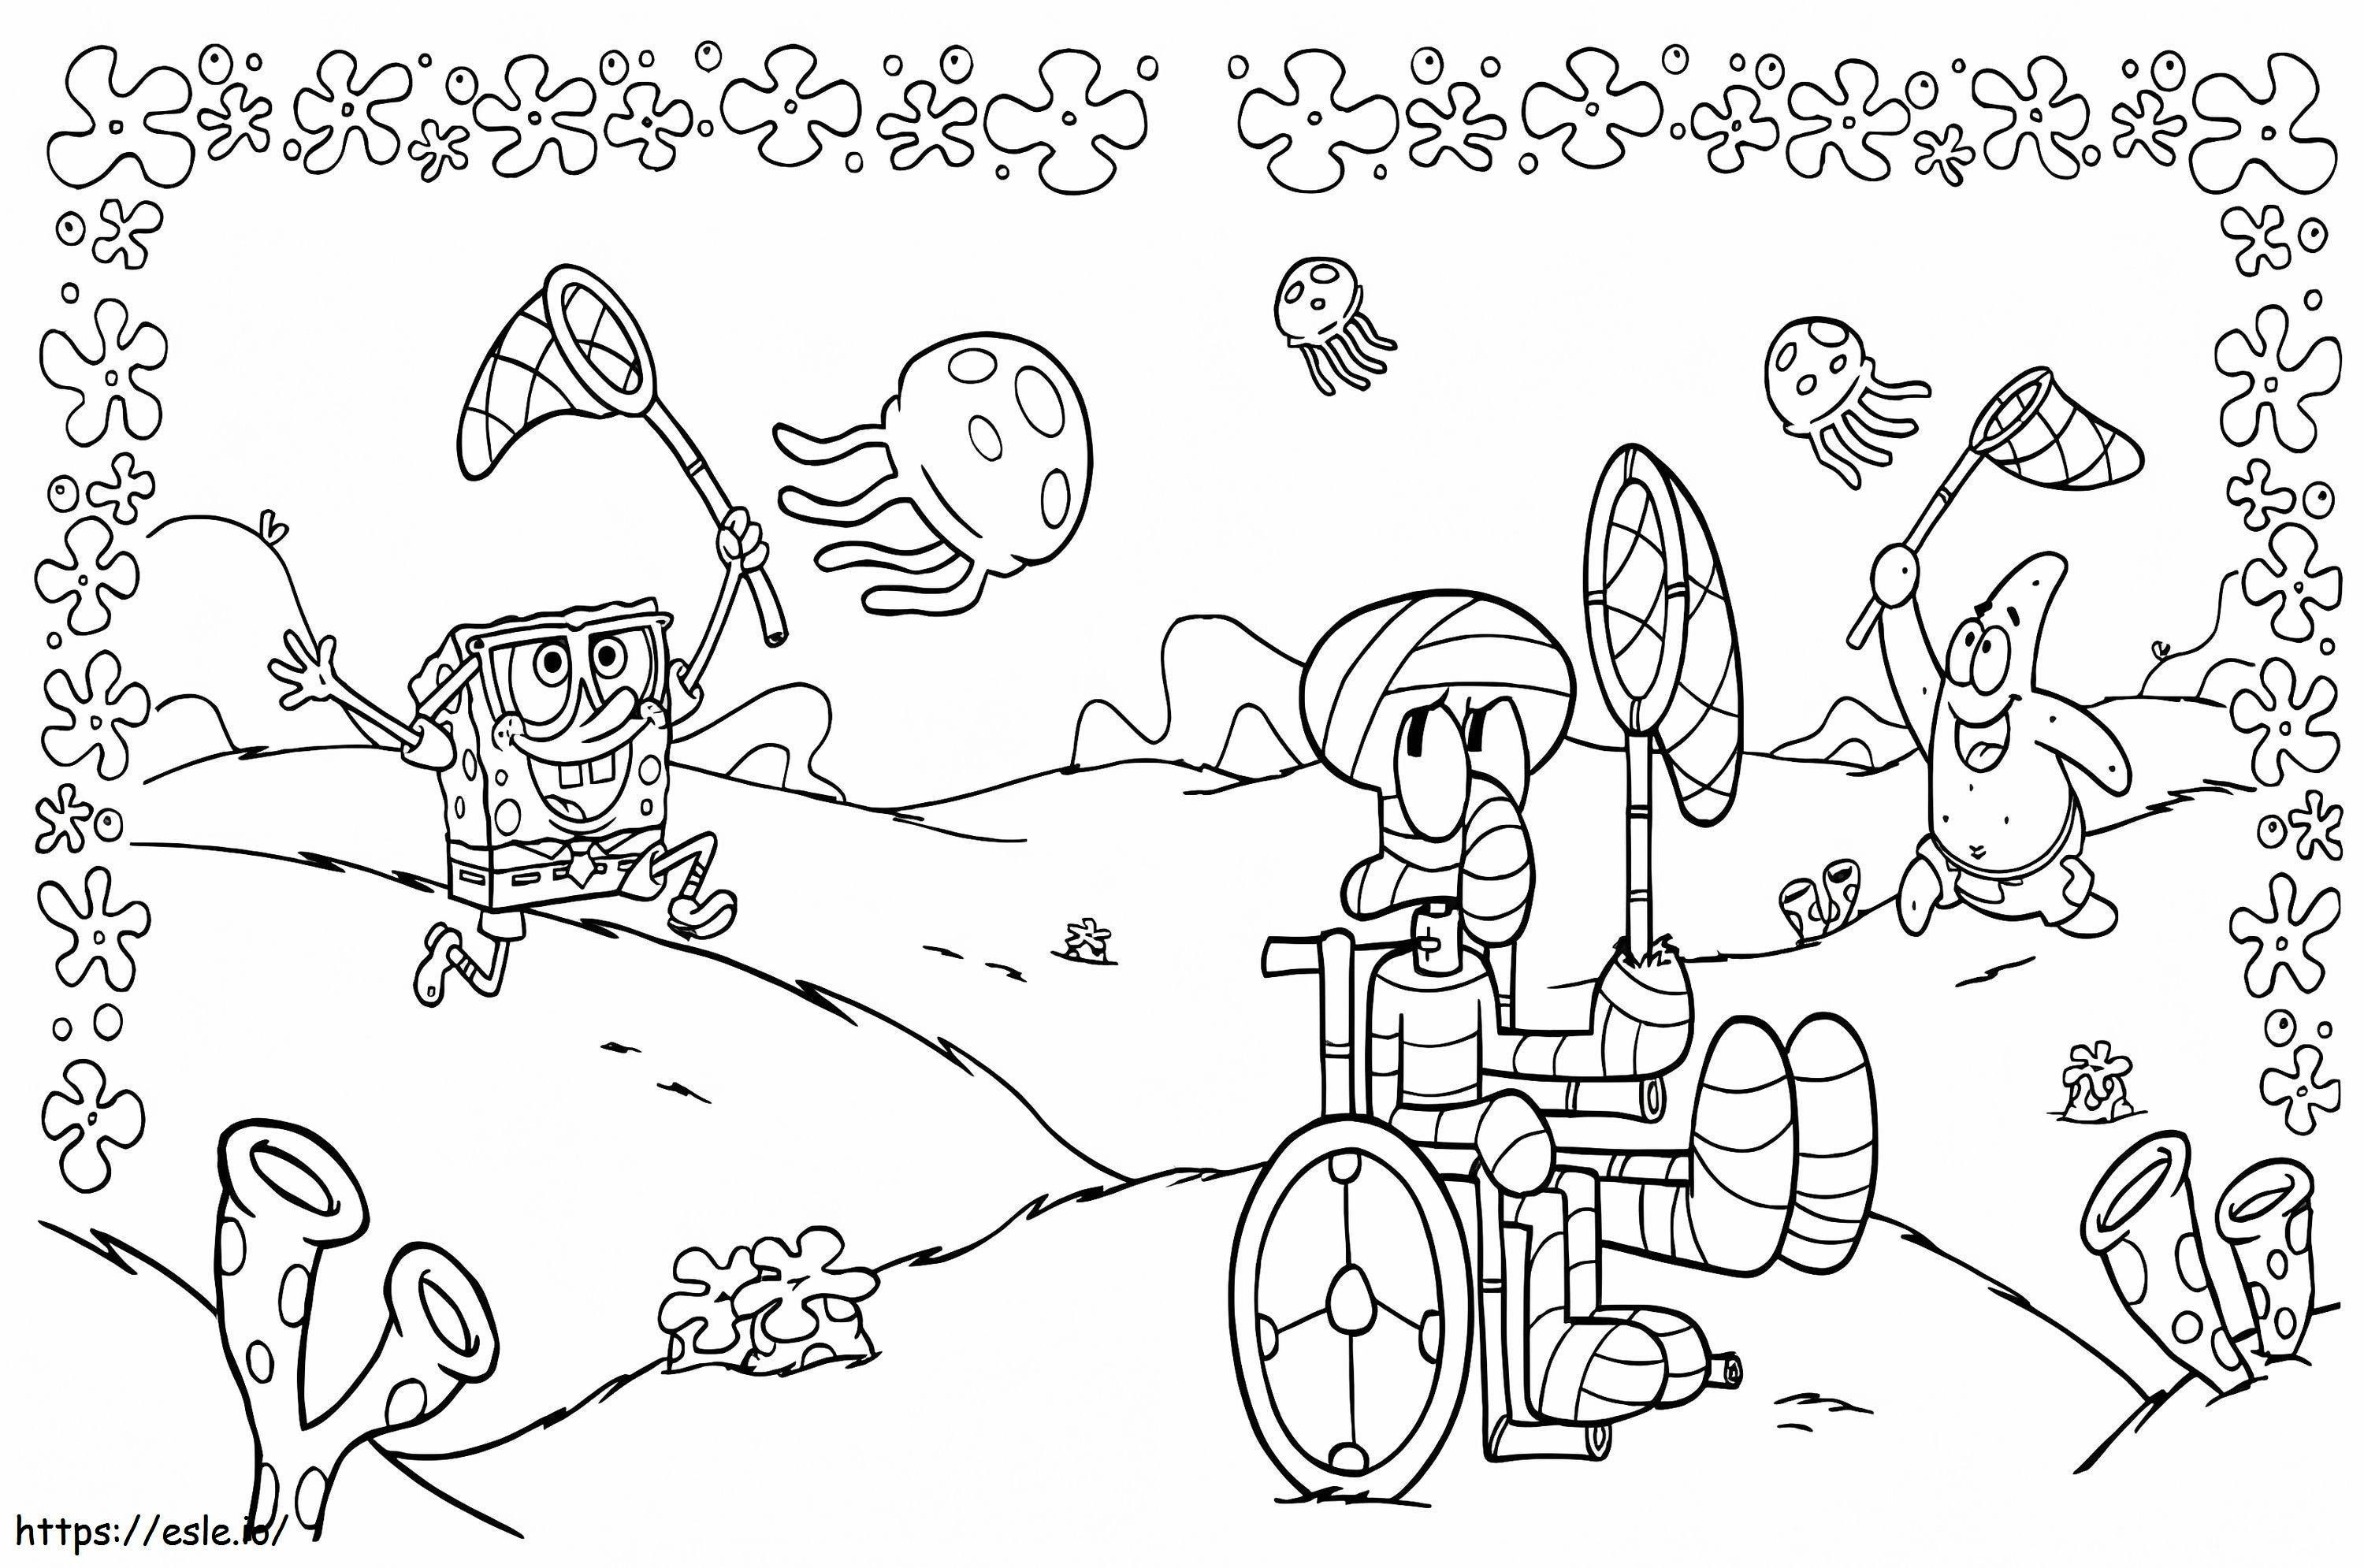 Funny Squidward coloring page